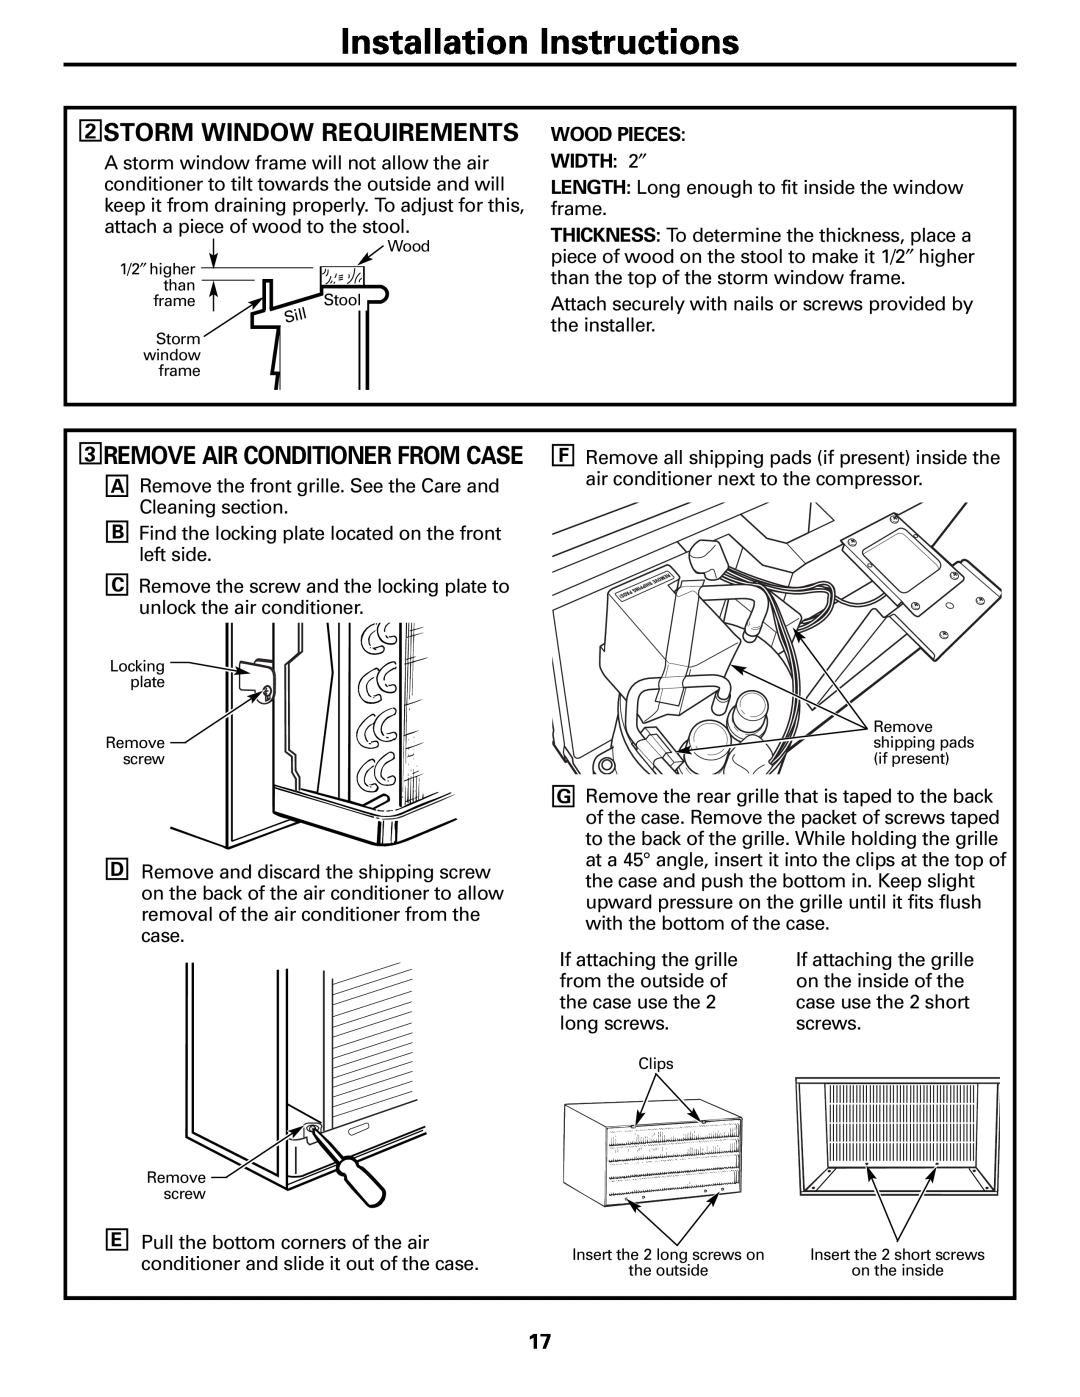 GE AJCH 10, AJHS 08, AJHS 10 Installation Instructions, 2STORM WINDOW REQUIREMENTS, 3REMOVE AIR CONDITIONER FROM CASE 